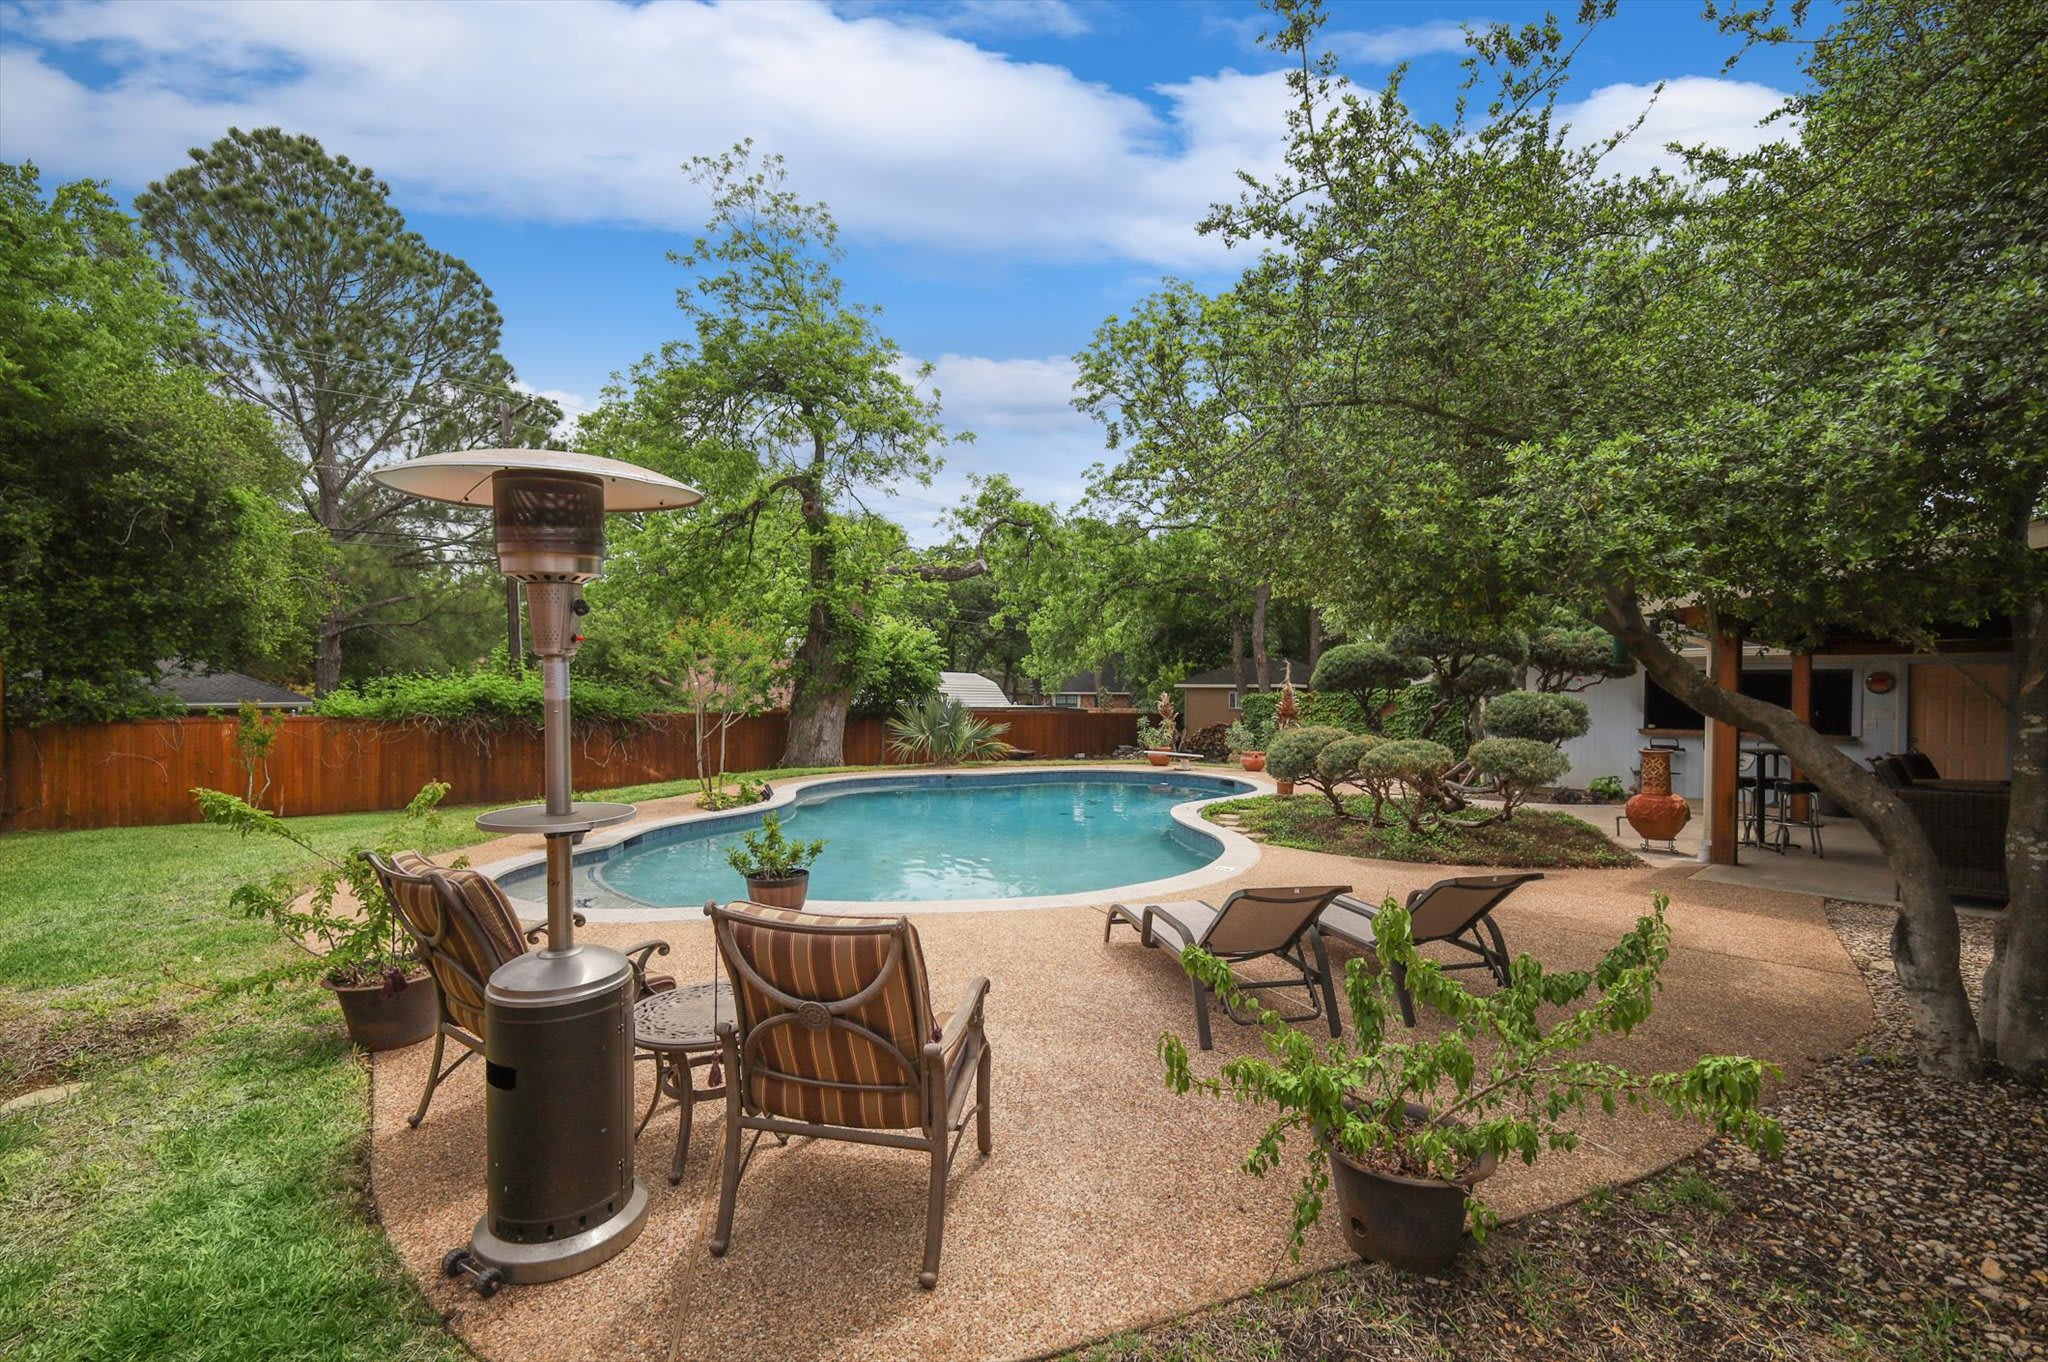 Come enjoy your fun in the sun splashing and relaxing in the pool! The poolside area is surrounded by professional landscaping, creating a peaceful and tranquil atmosphere.